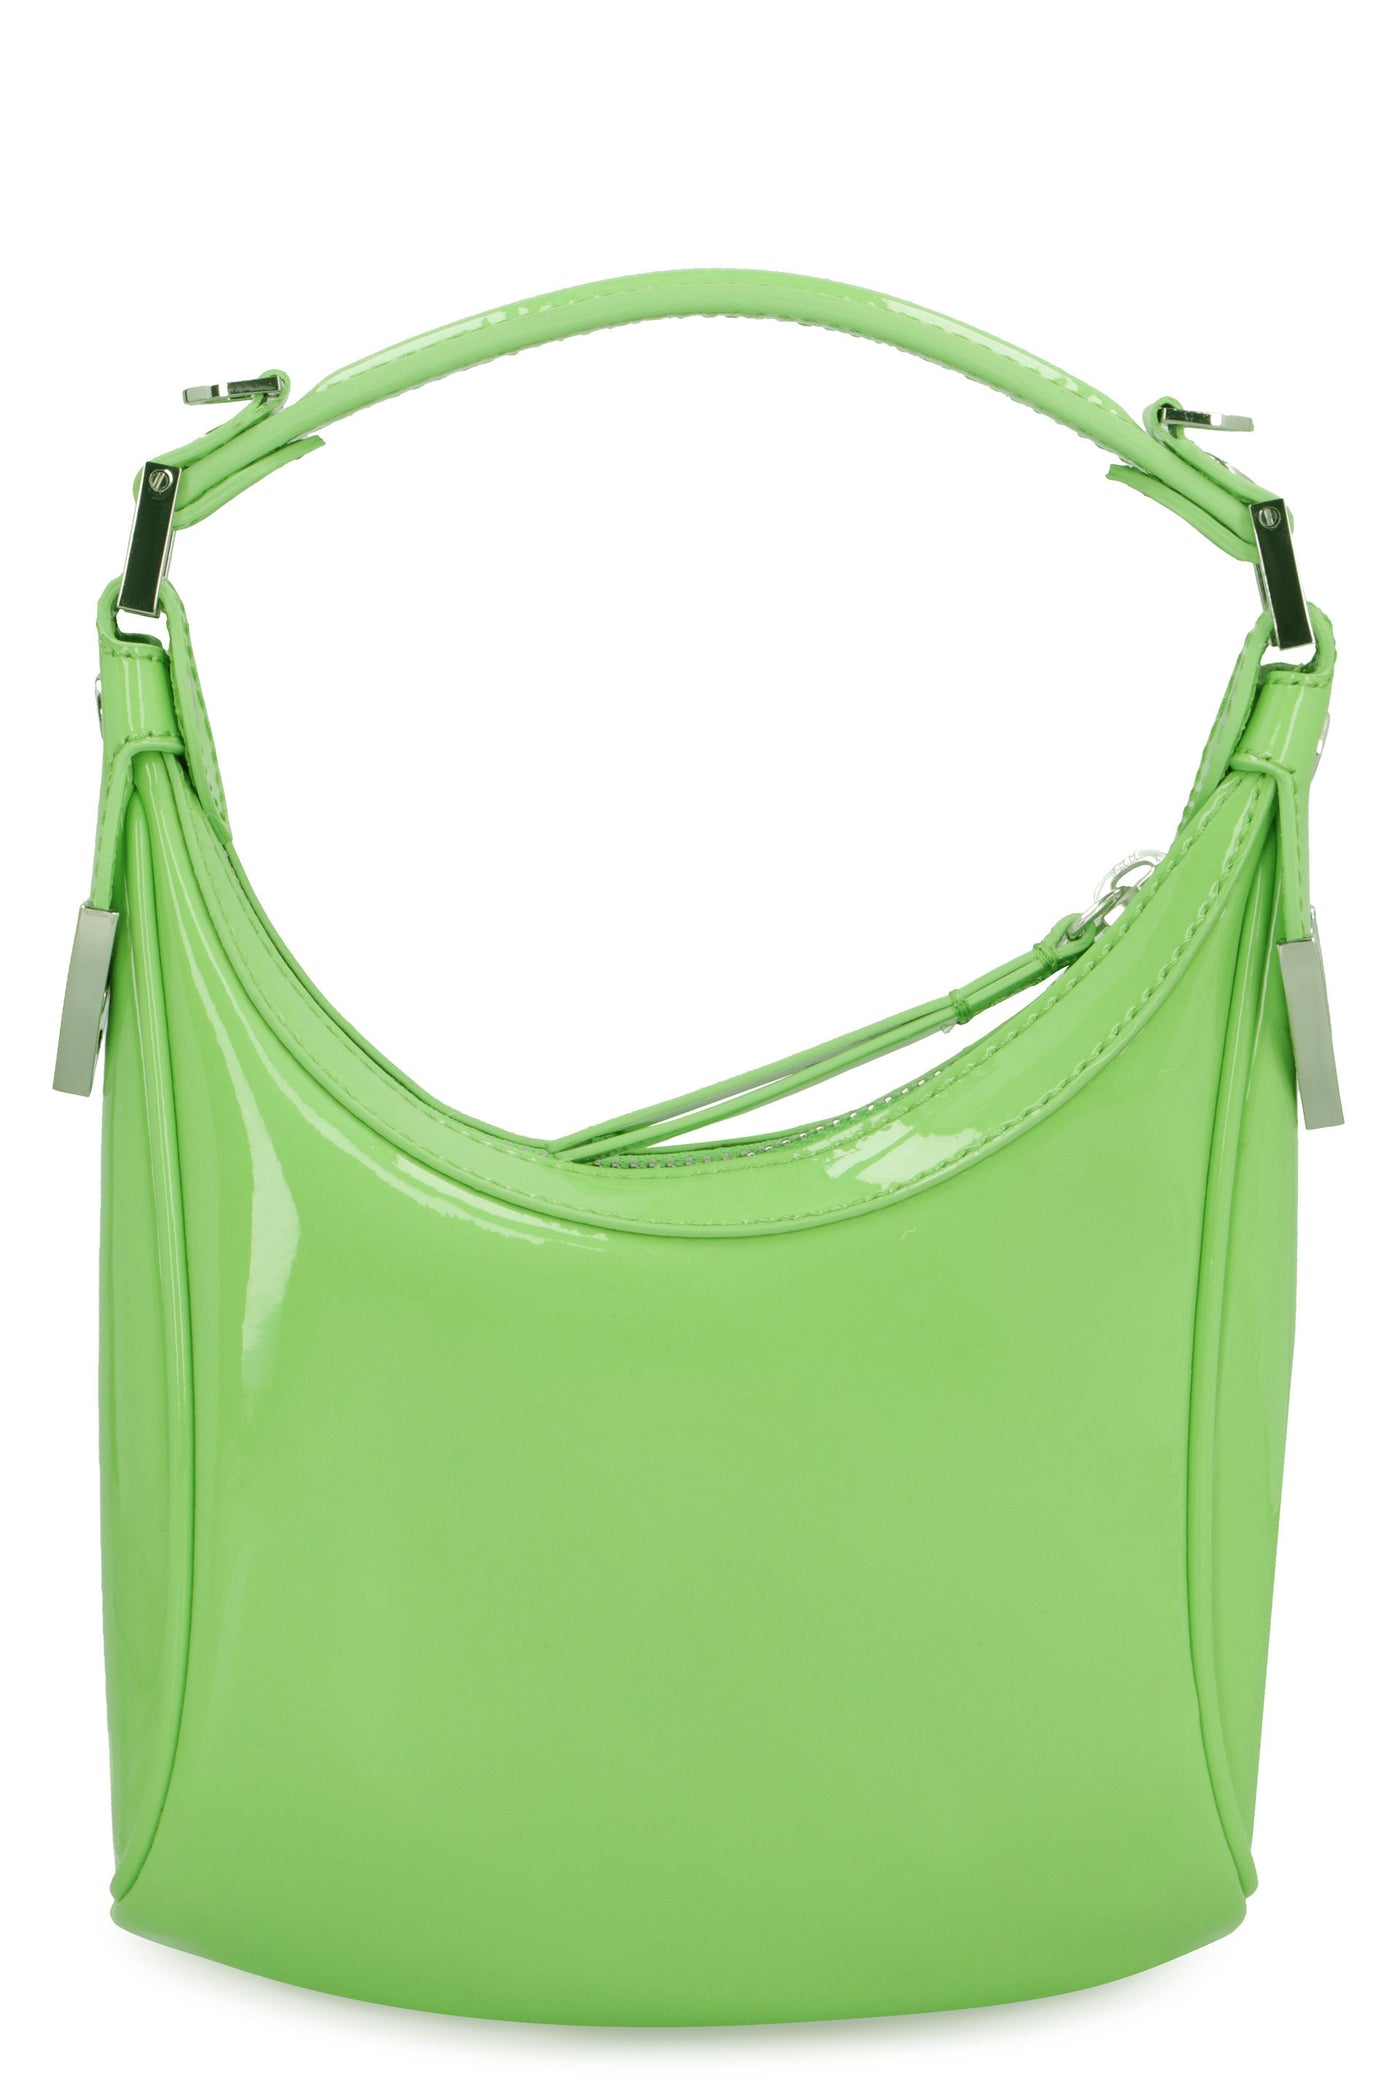 FRG BY FAR  PATENT LEATHER 'COSMO' BAG